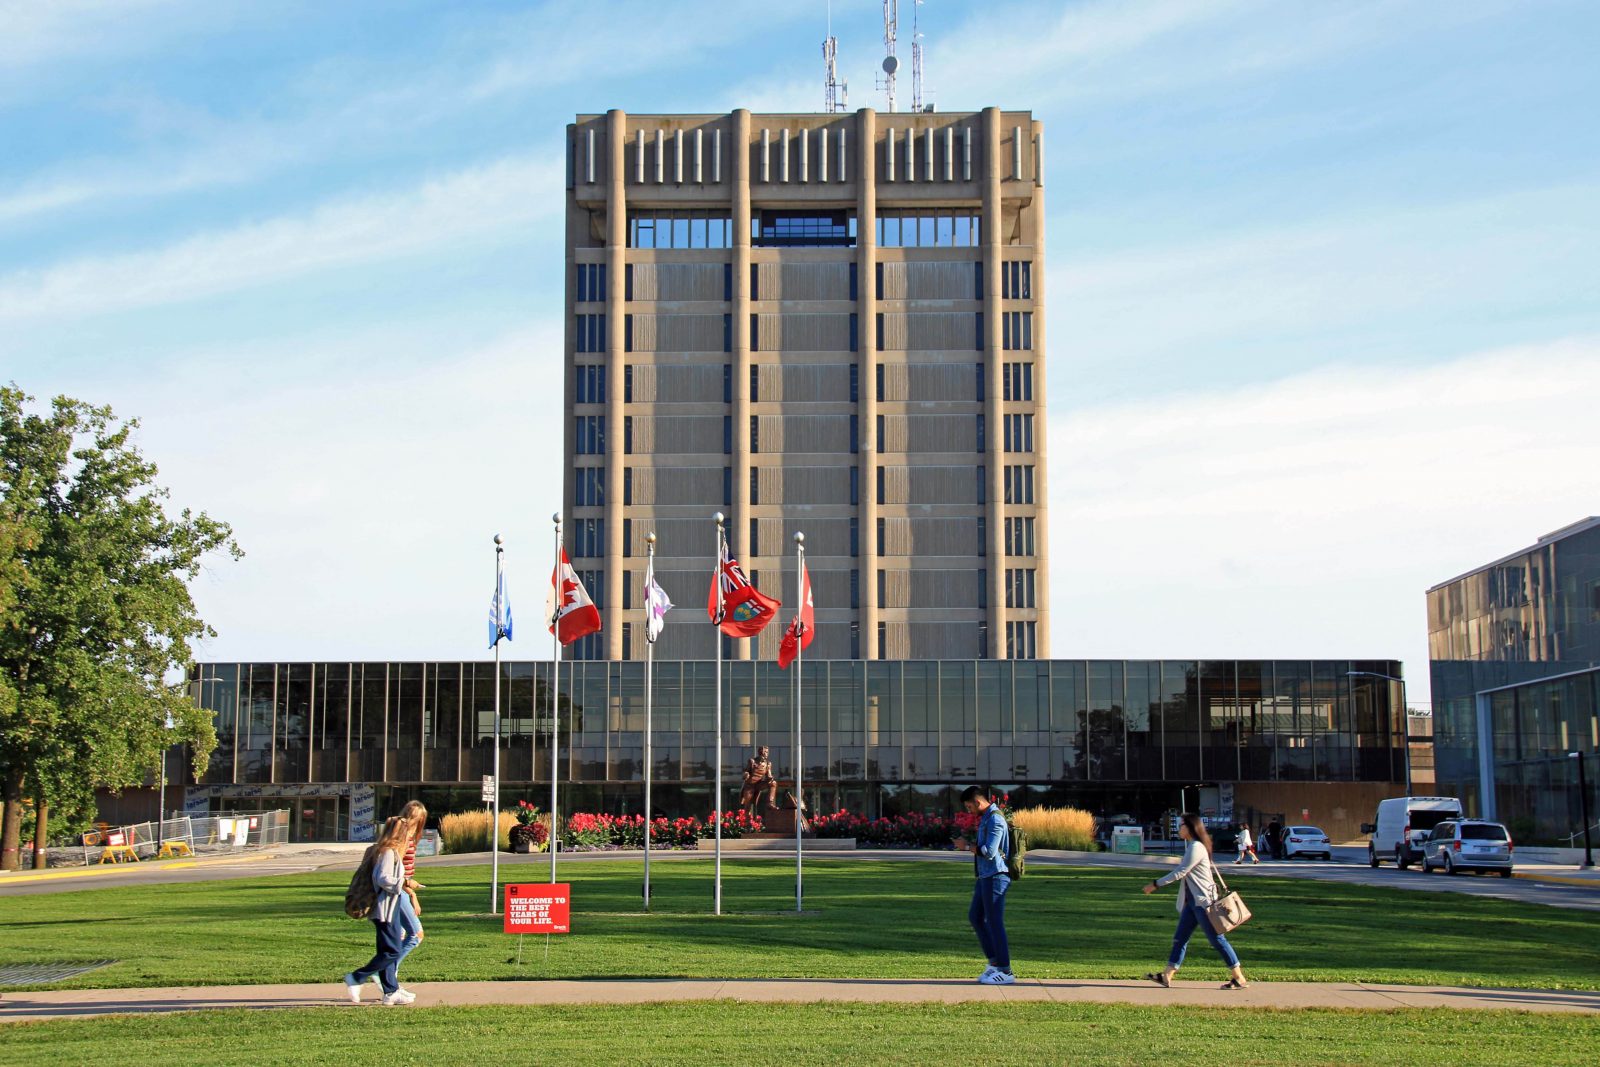 A 13-storey brown building against a blue sky in the background, with students walking on a sidewalk surrounded by green space in the foreground.